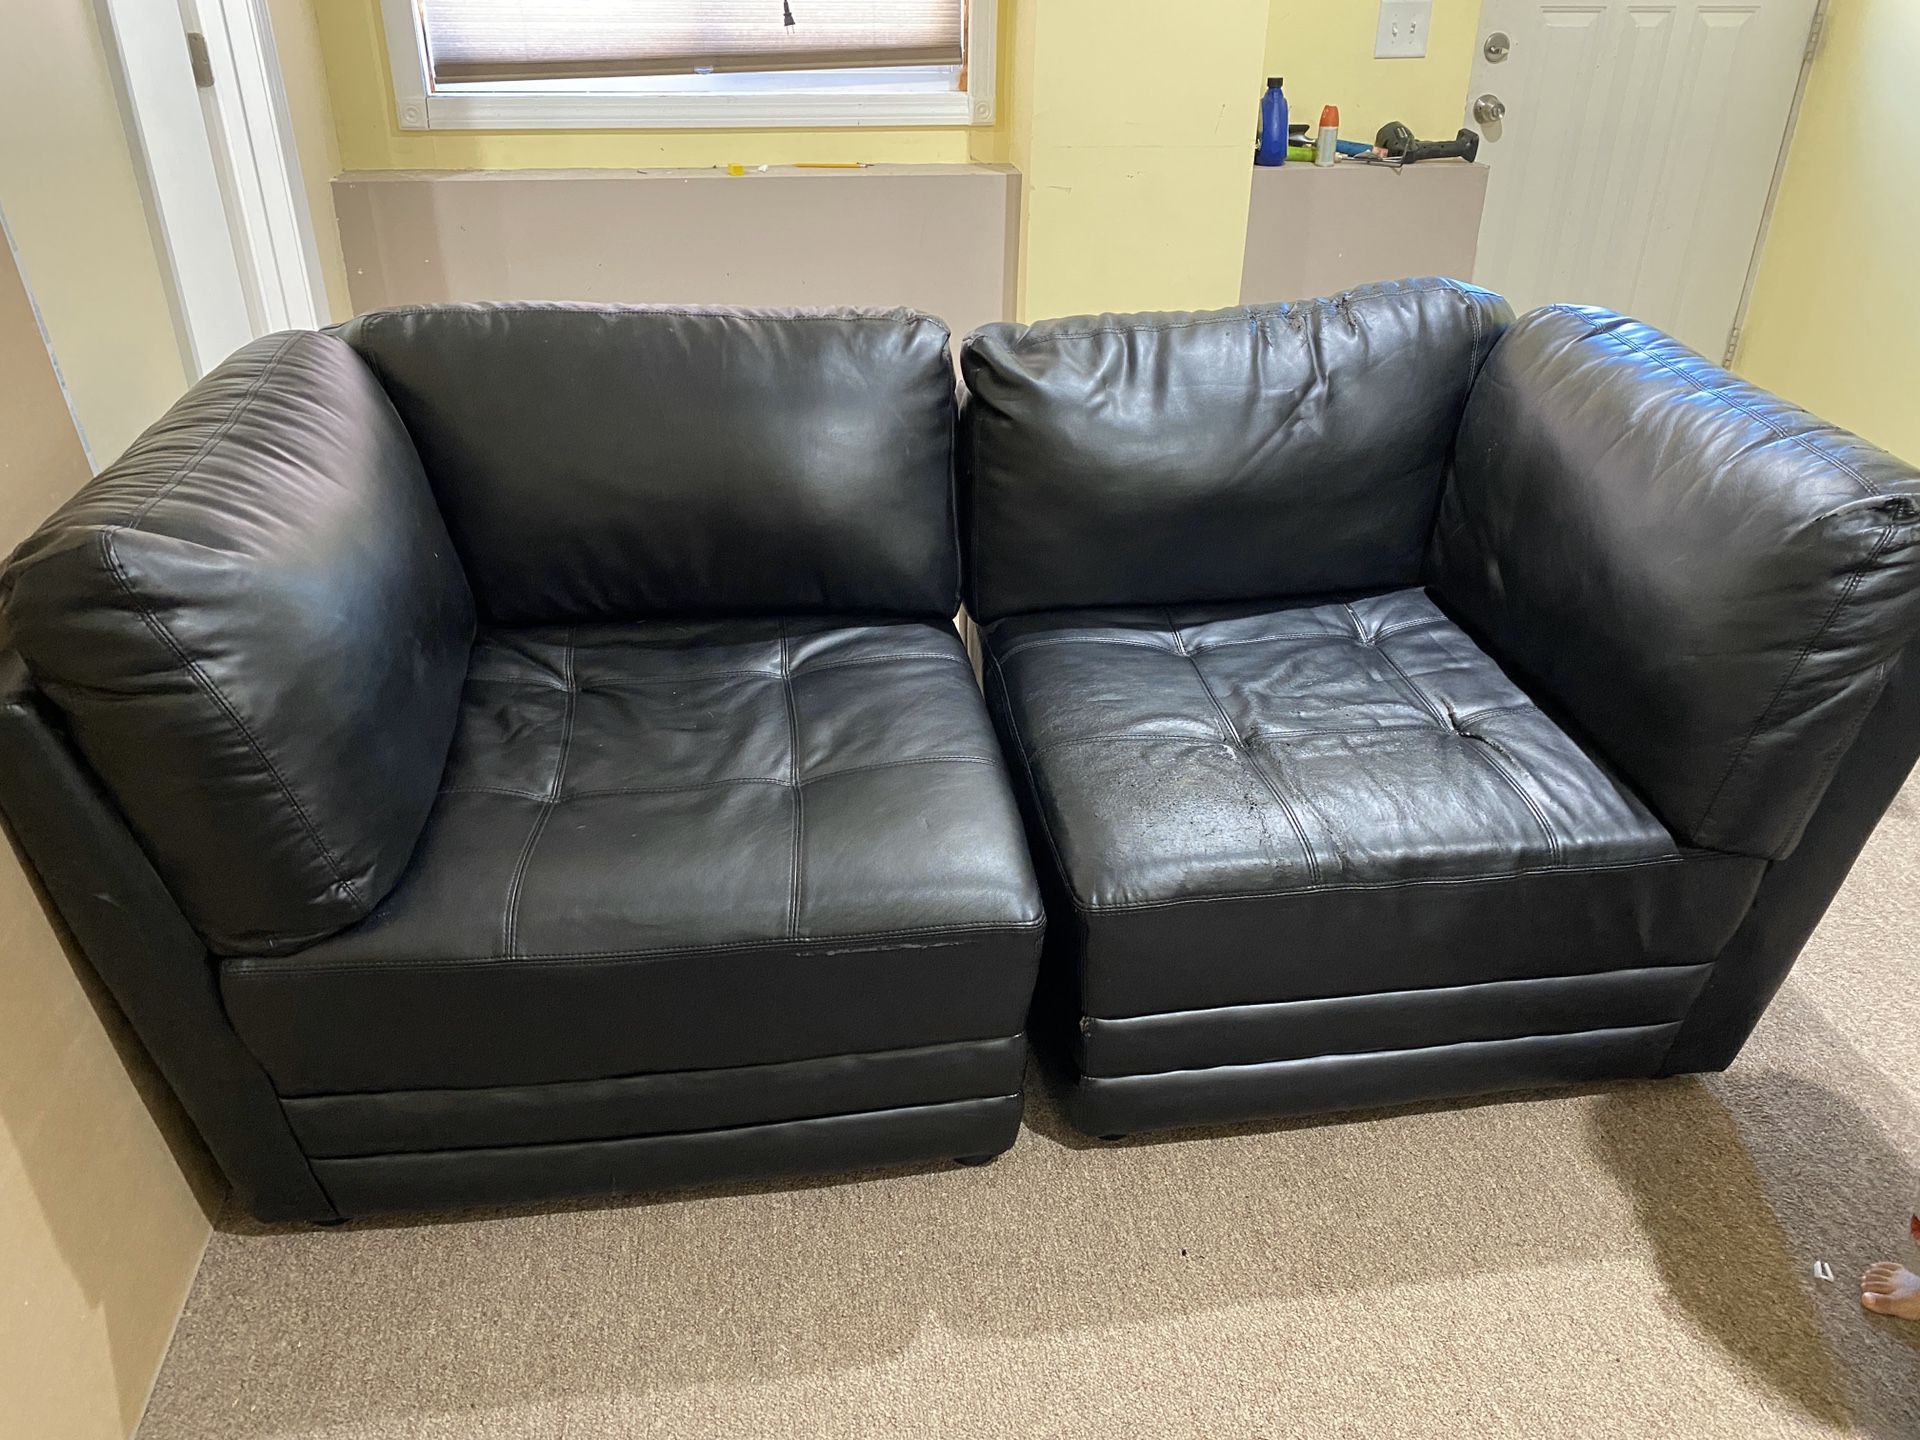 Free Black sofa/couch/sectional